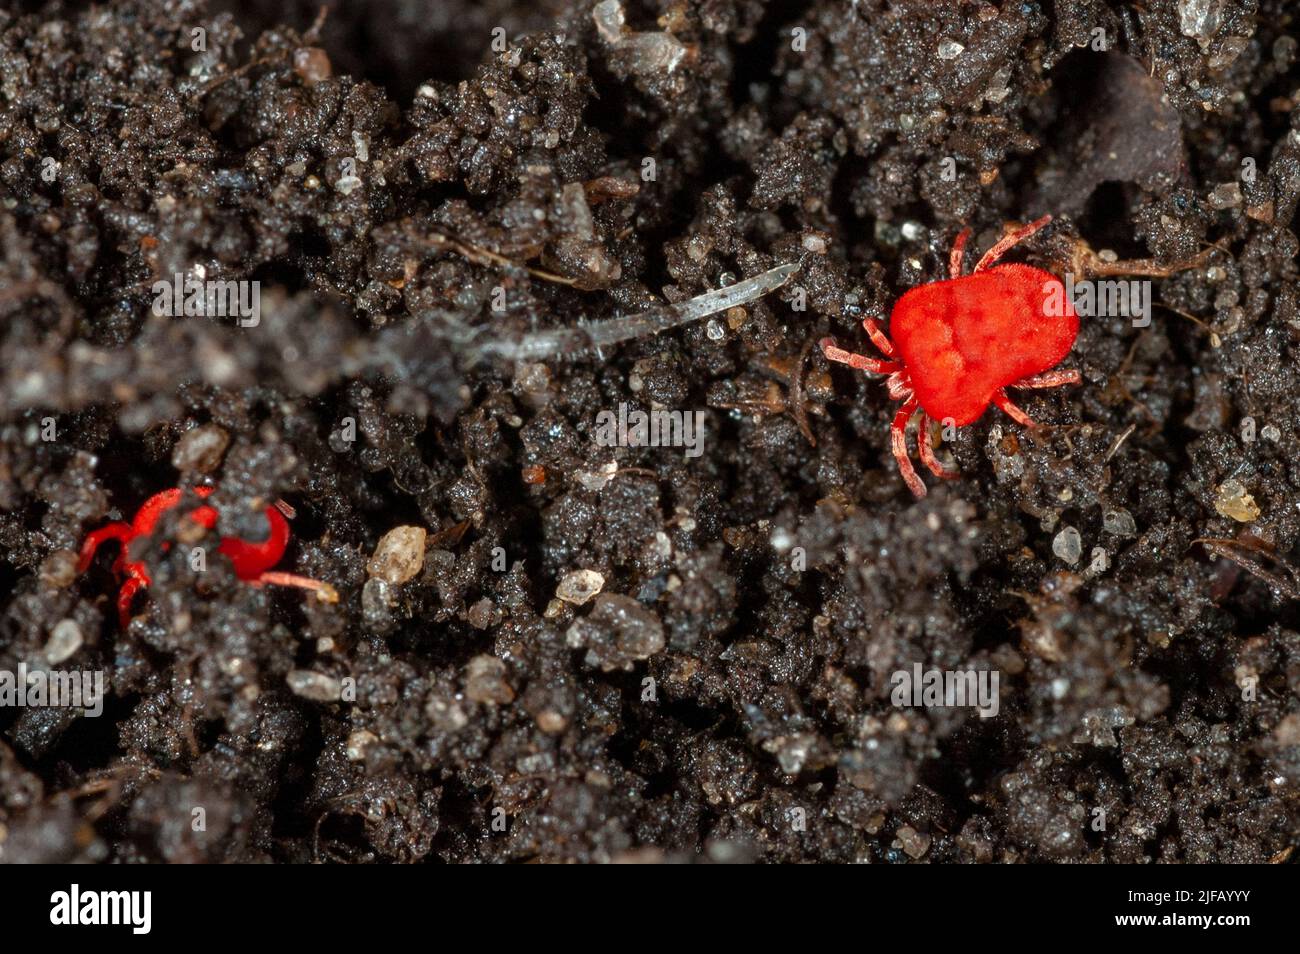 Red mite (Trombidium sp., probably T. holosericeum) crawling in soli i south-western Norway. Stock Photo